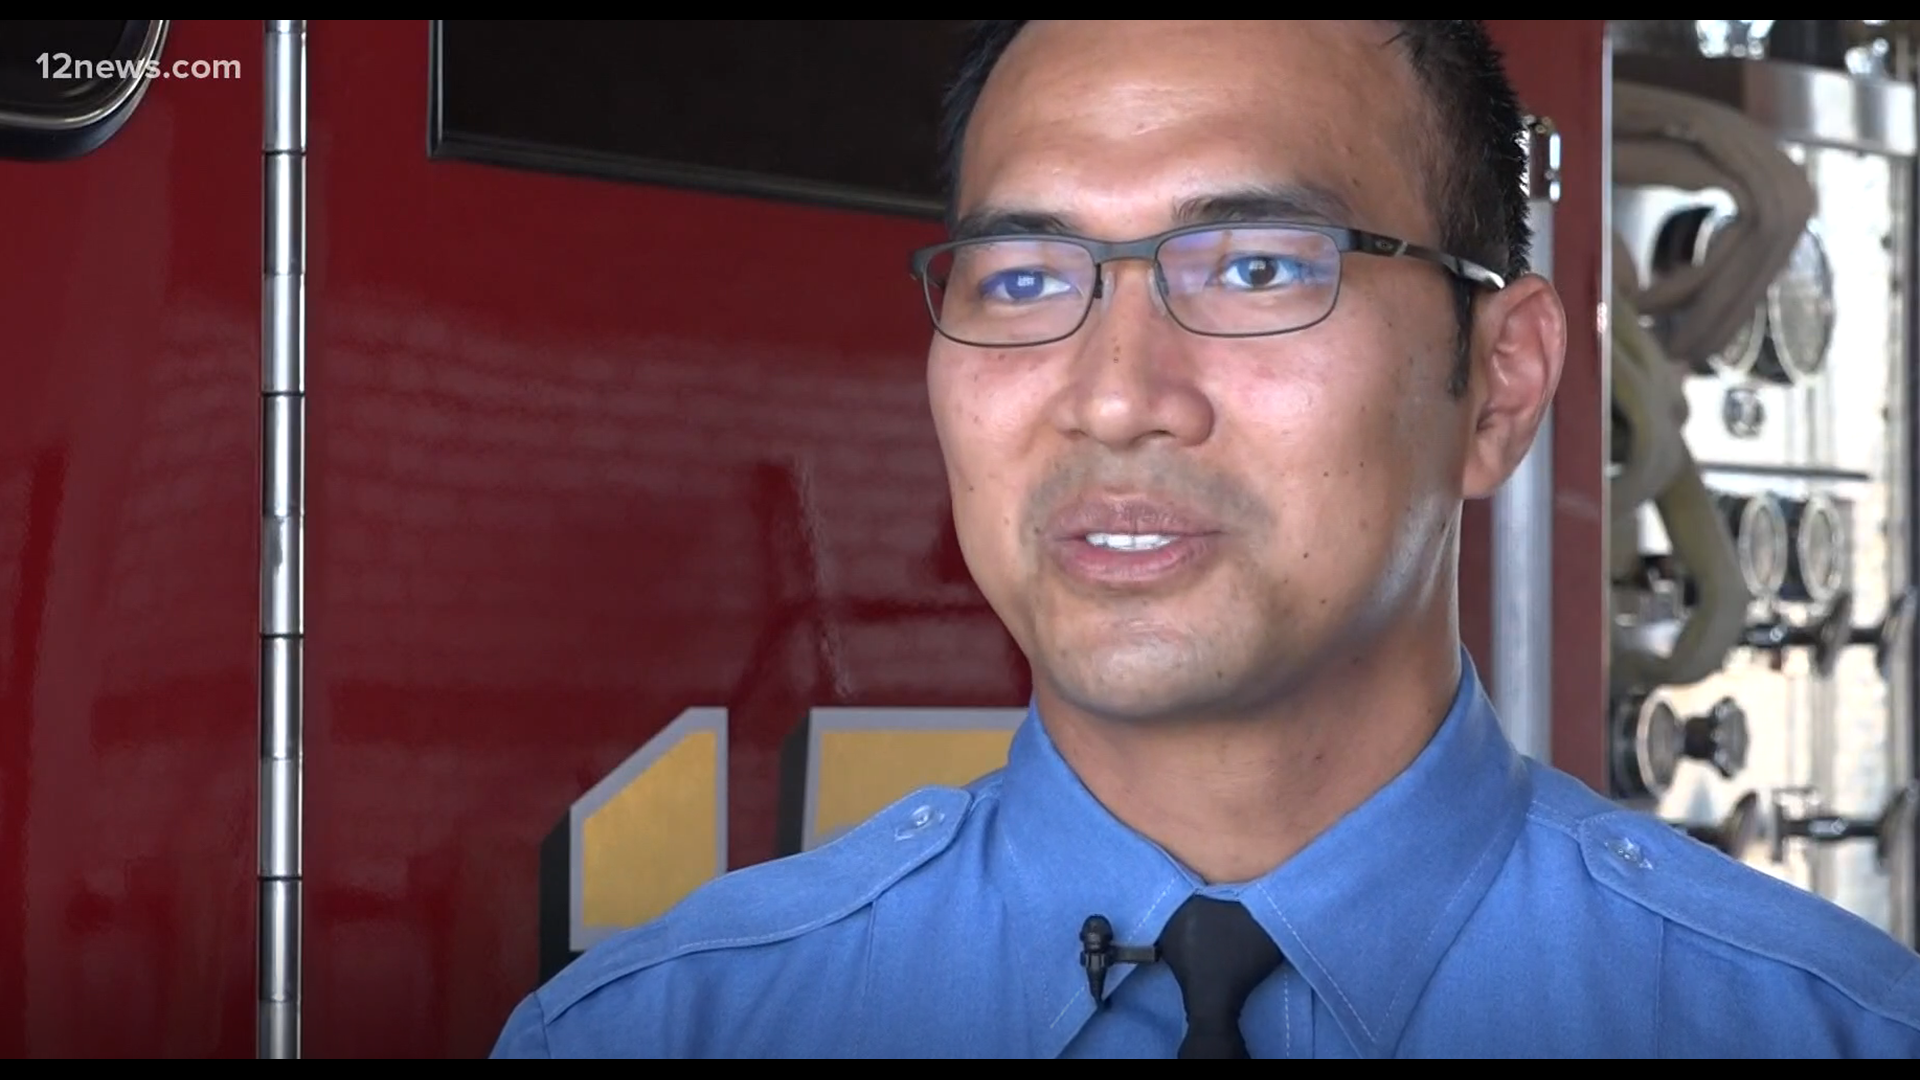 One Phoenix firefighter paramedic says he's serving the community in his role because of the opportunities the U.S. gave him and his family after they fled Cambodia.